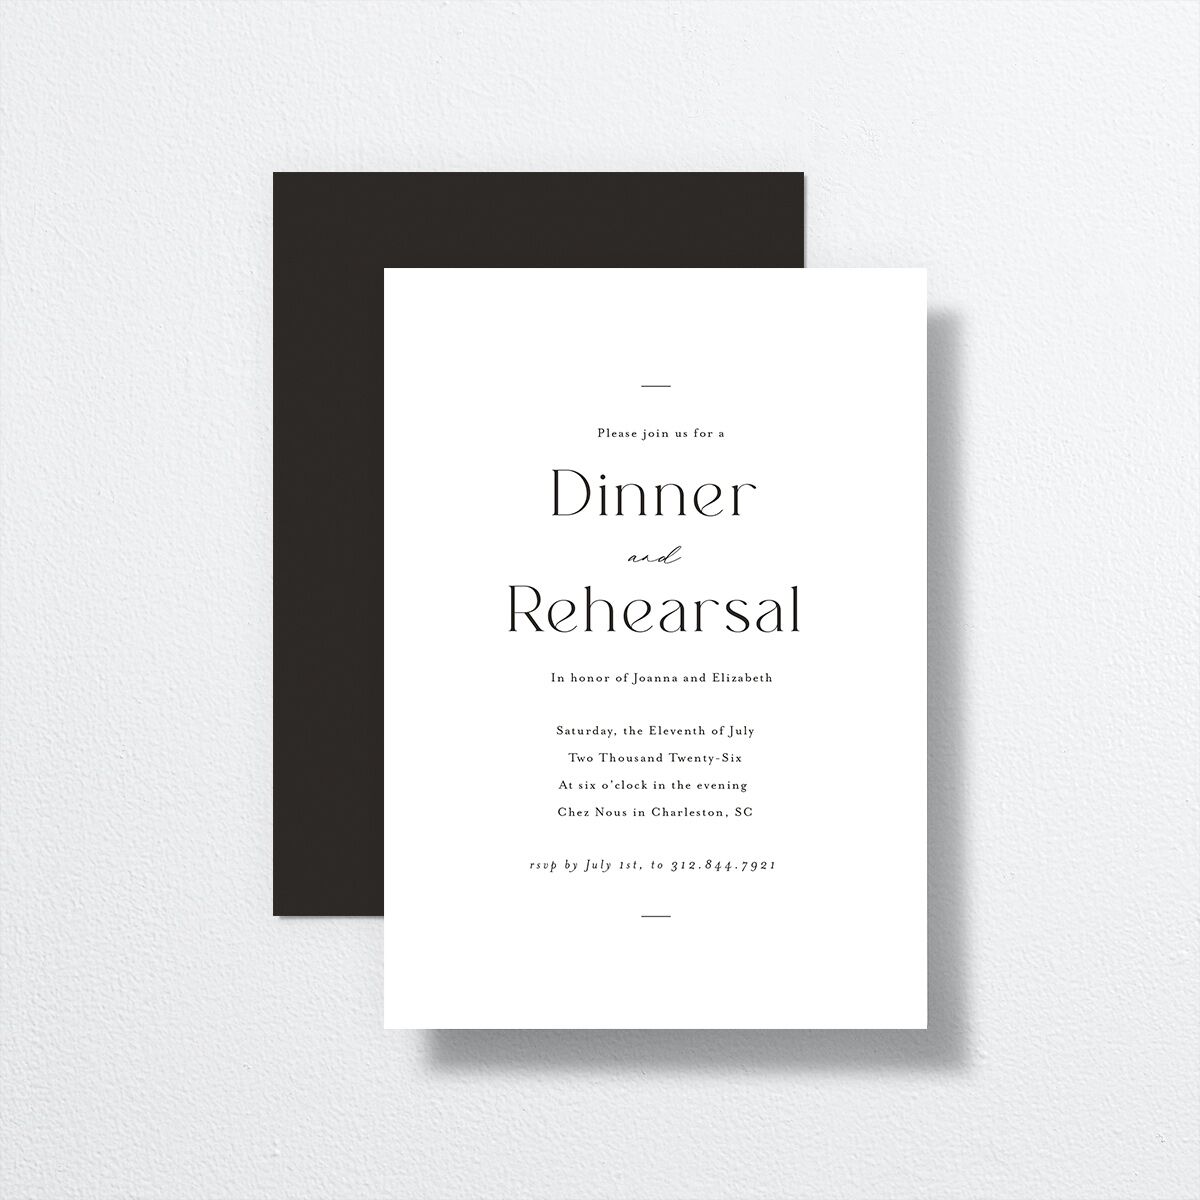 Refined Rehearsal Dinner Invitations front-and-back